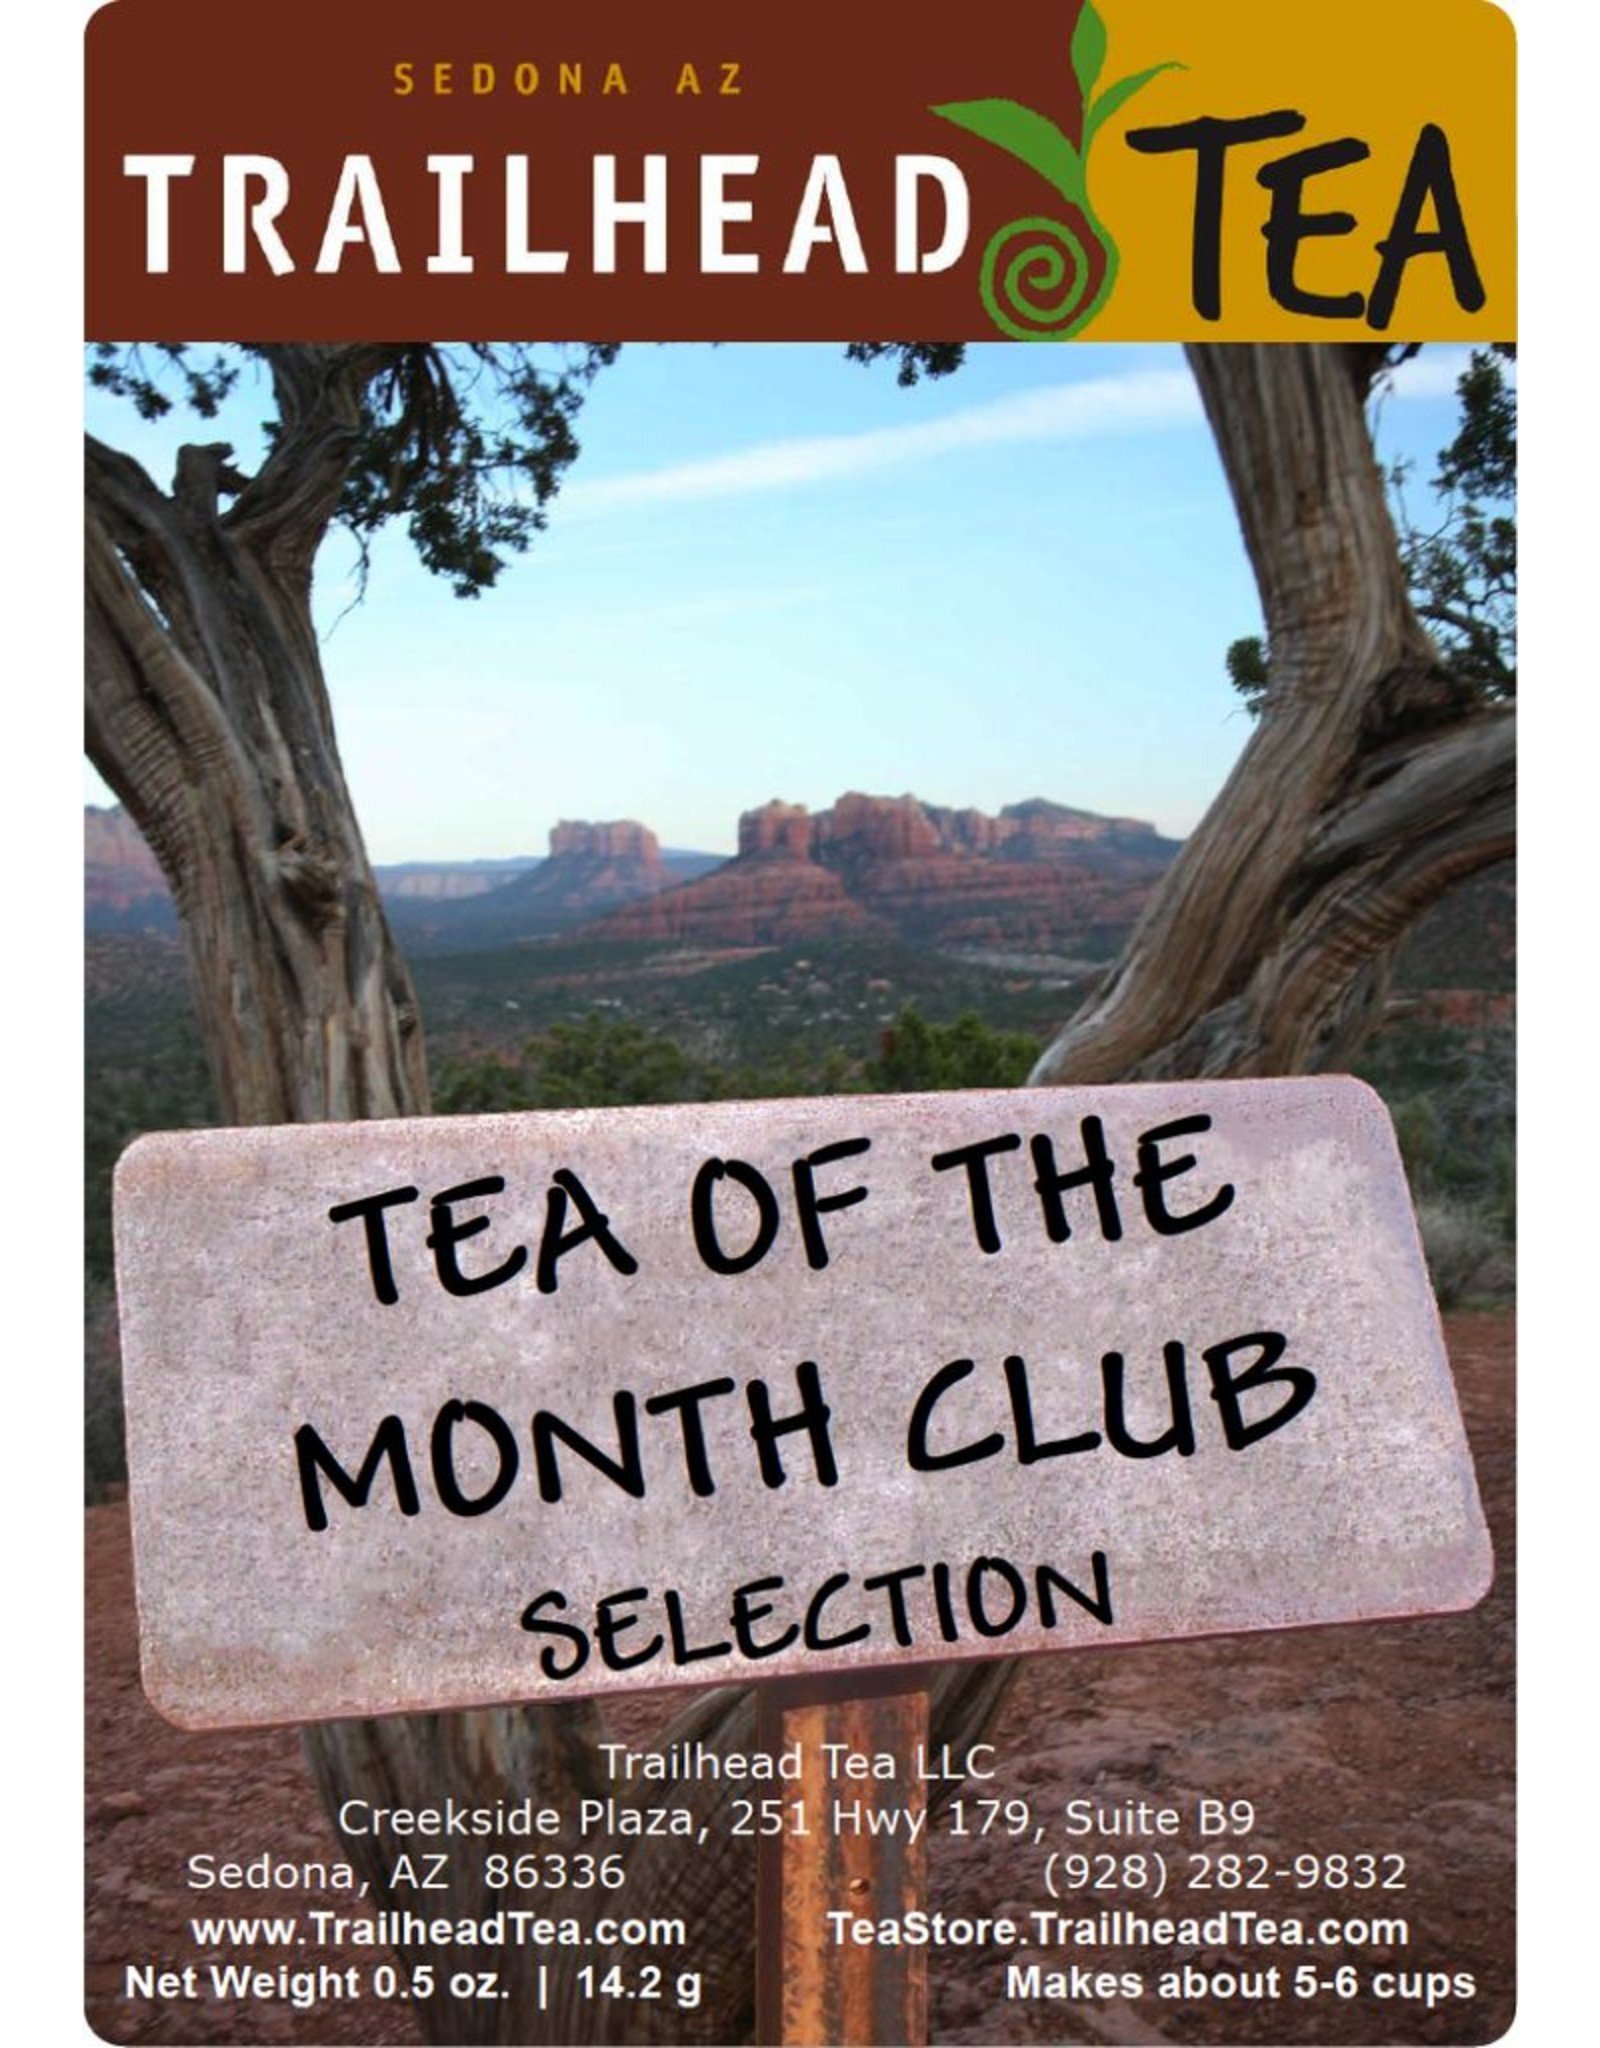 Tea Blended Tea-Of-The-Month-Club is a variable selection, offered for only $3, to any web order over $40